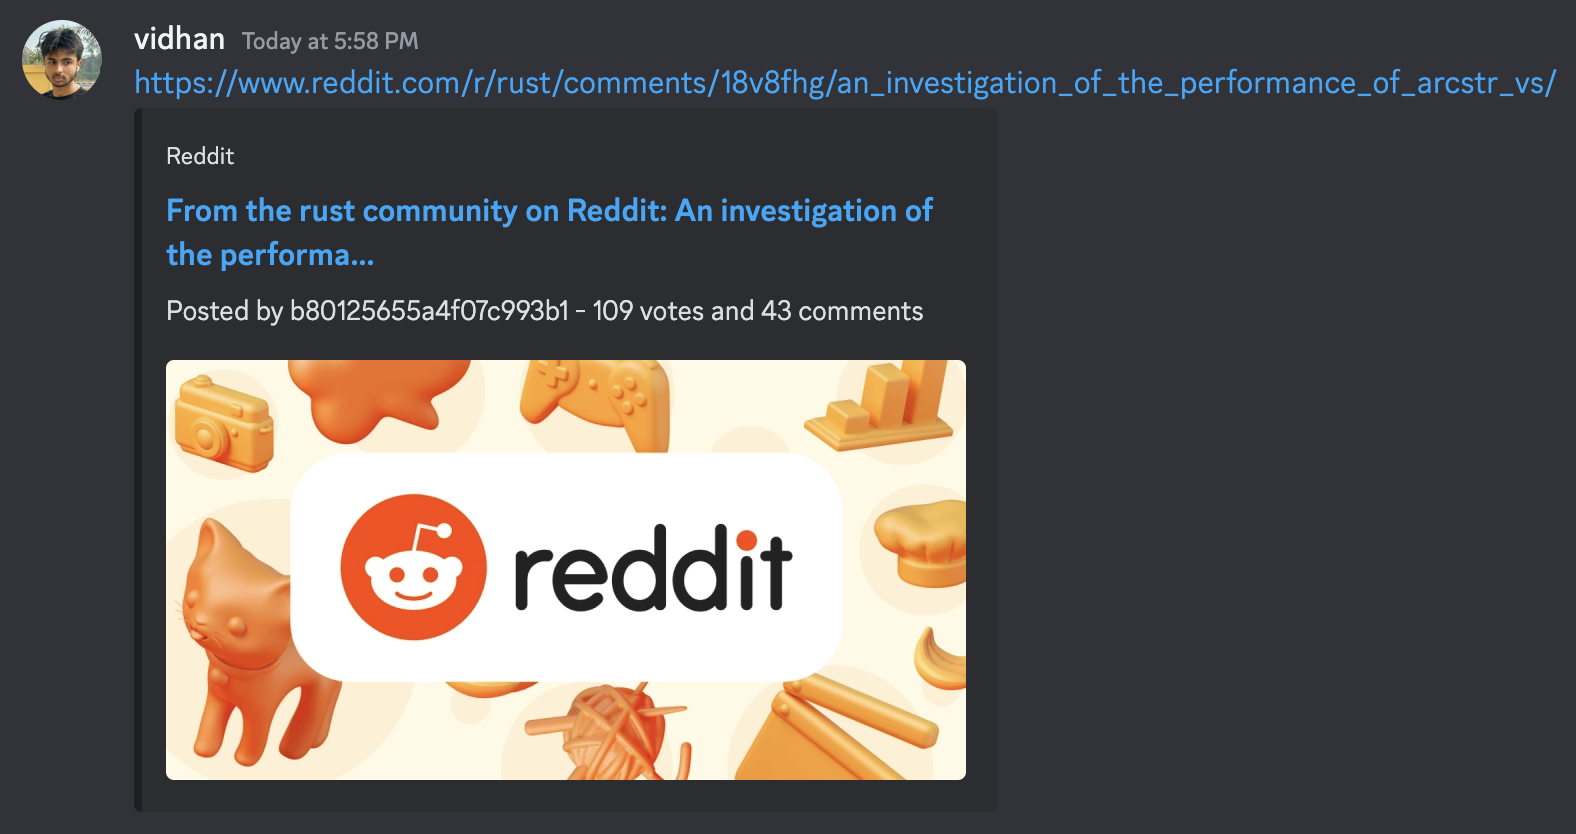 Discord user “vidhan” posting a link to a Reddit post with an Open Graph image preview.